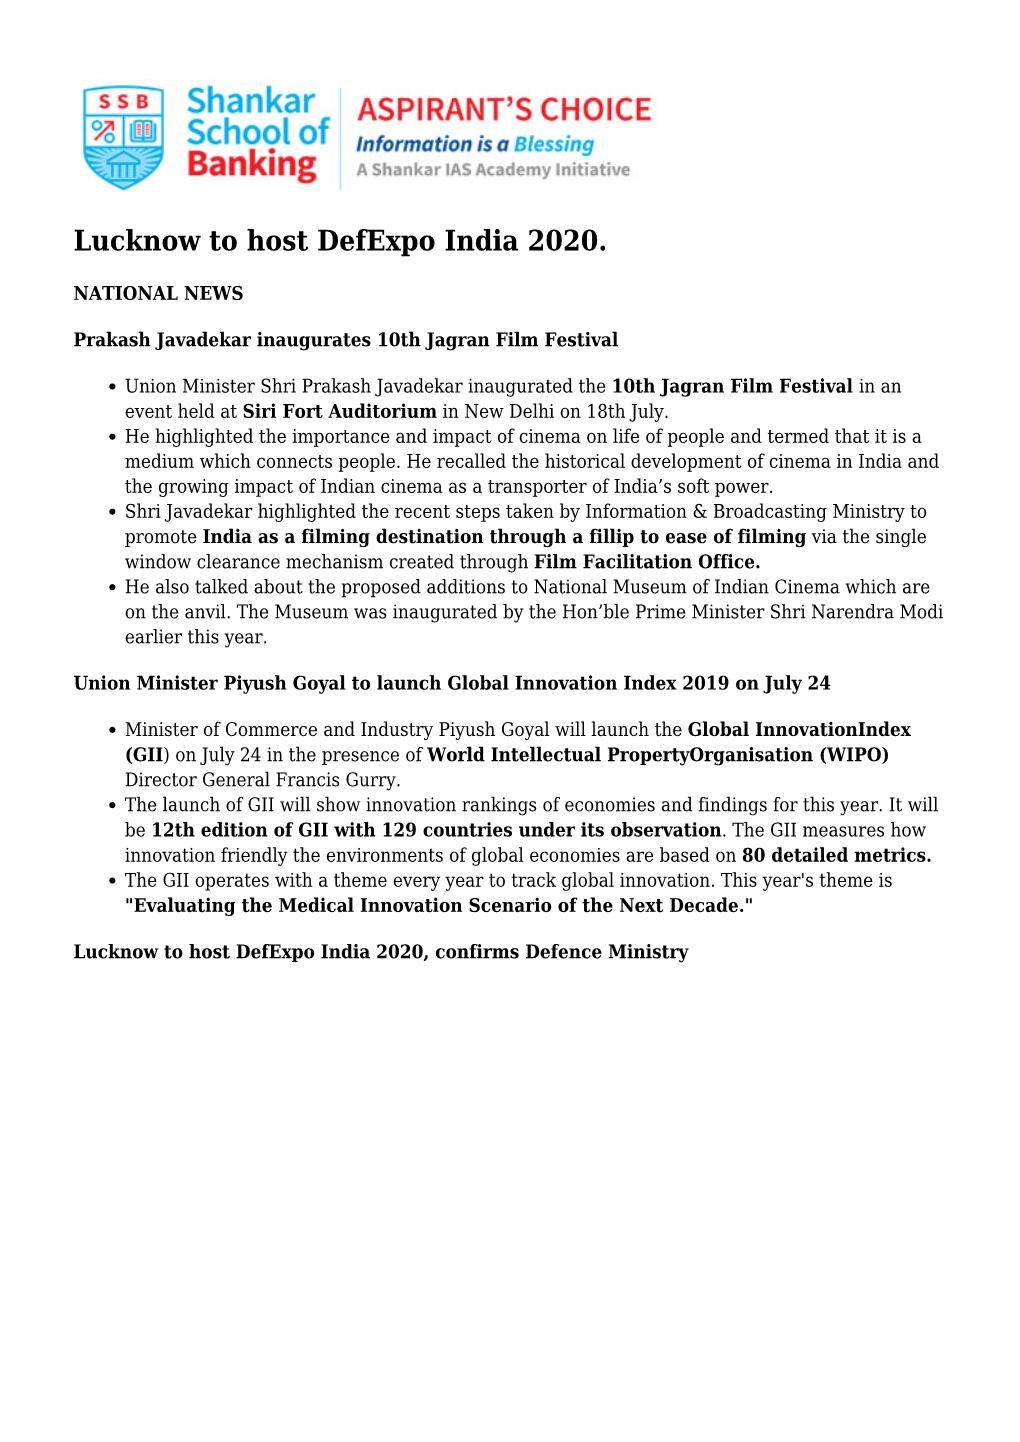 Lucknow to Host Defexpo India 2020